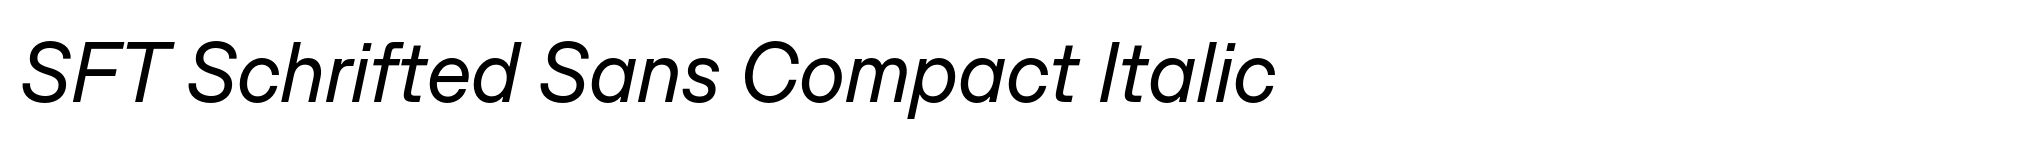 SFT Schrifted Sans Compact Italic image